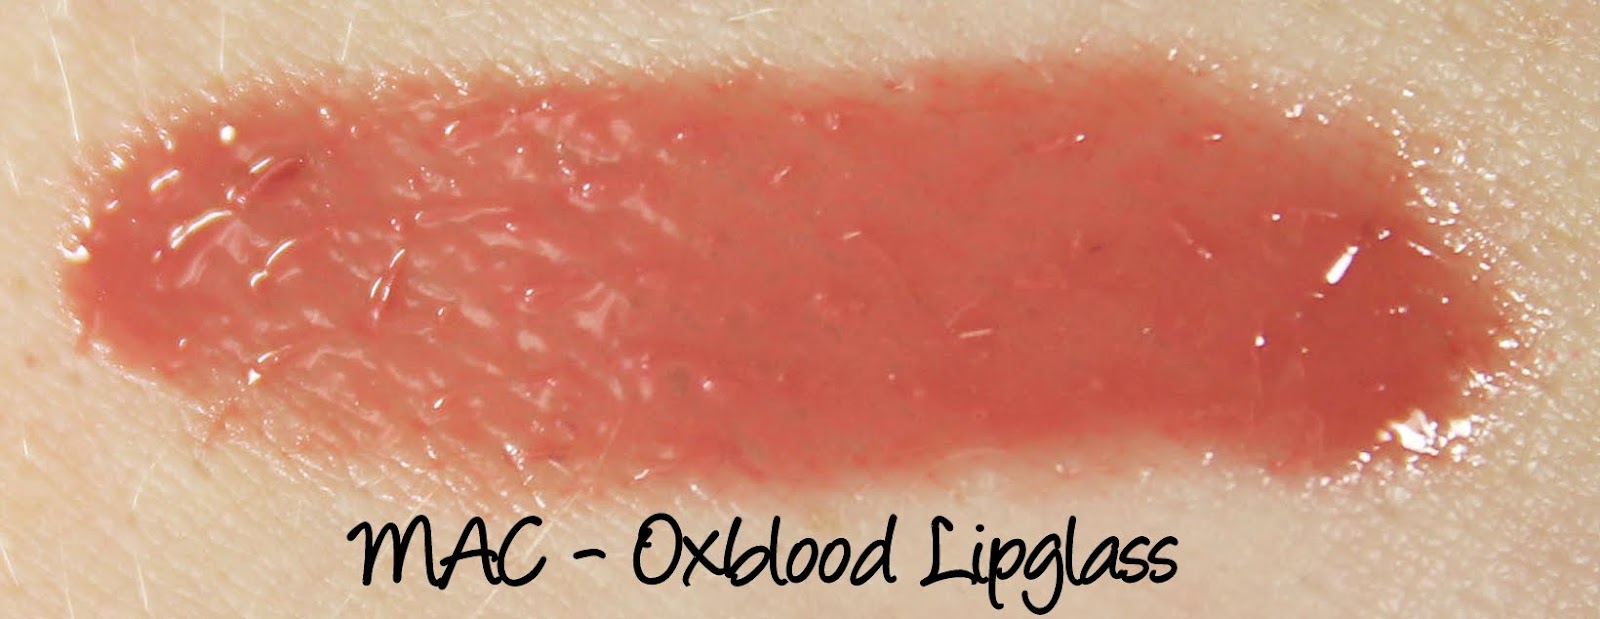 MAC Toledo - Oxblood Lipglass Swatches & Review